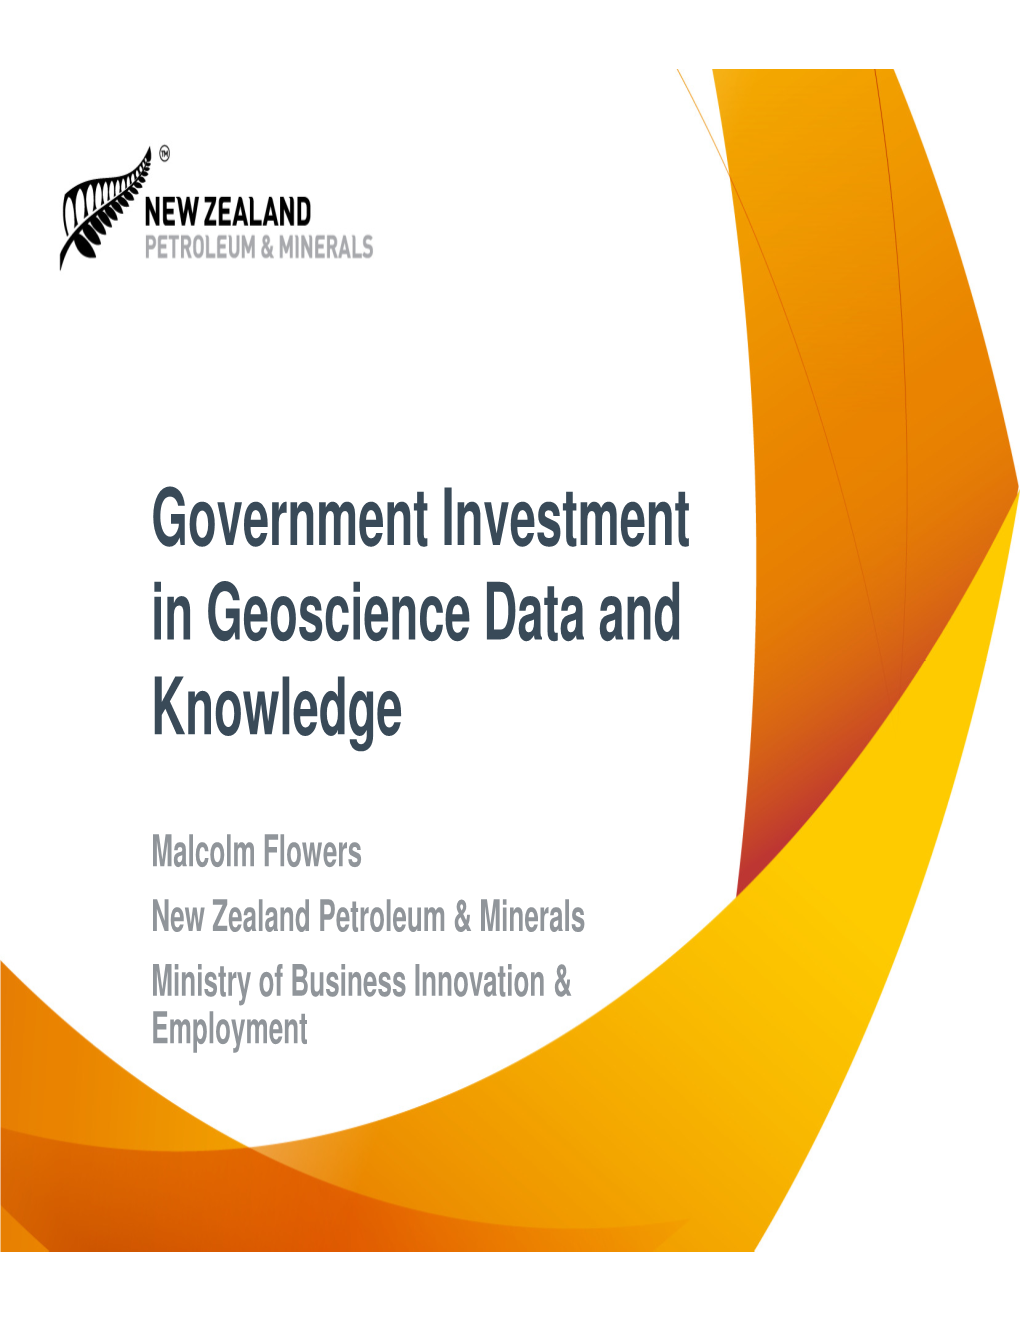 Government Investment in Geoscience Data and Knowledge